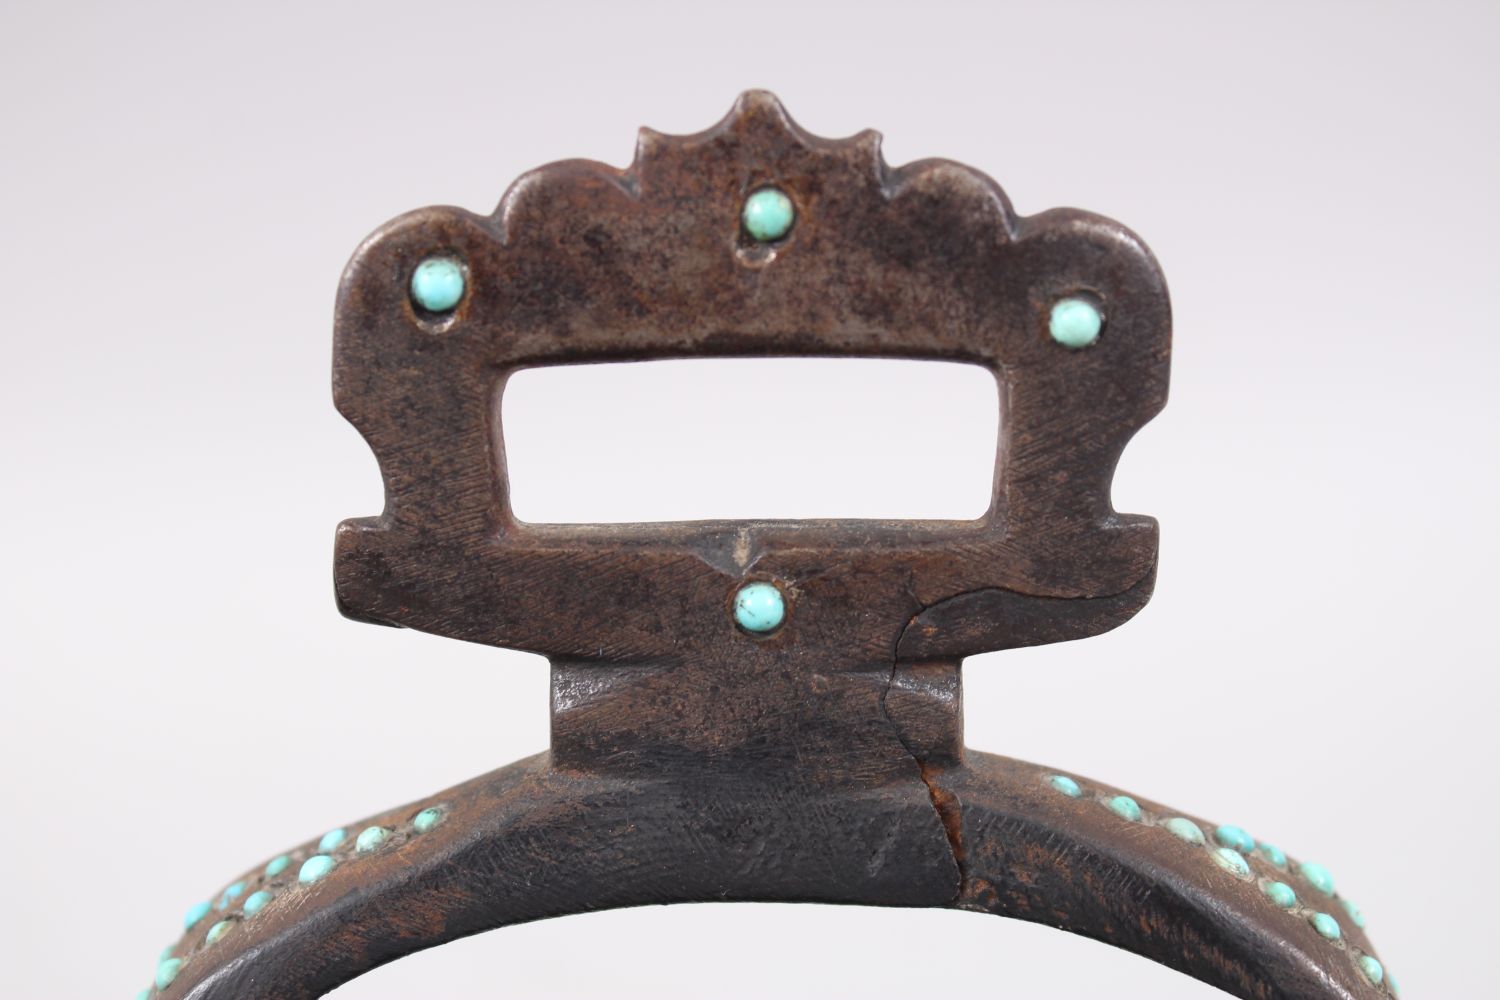 A GOOD PAIR OF 18TH-19TH CENTURY PERSIAN QAJAR STIRRUPS mounted with turquoise beads, 18cm high x - Image 5 of 6